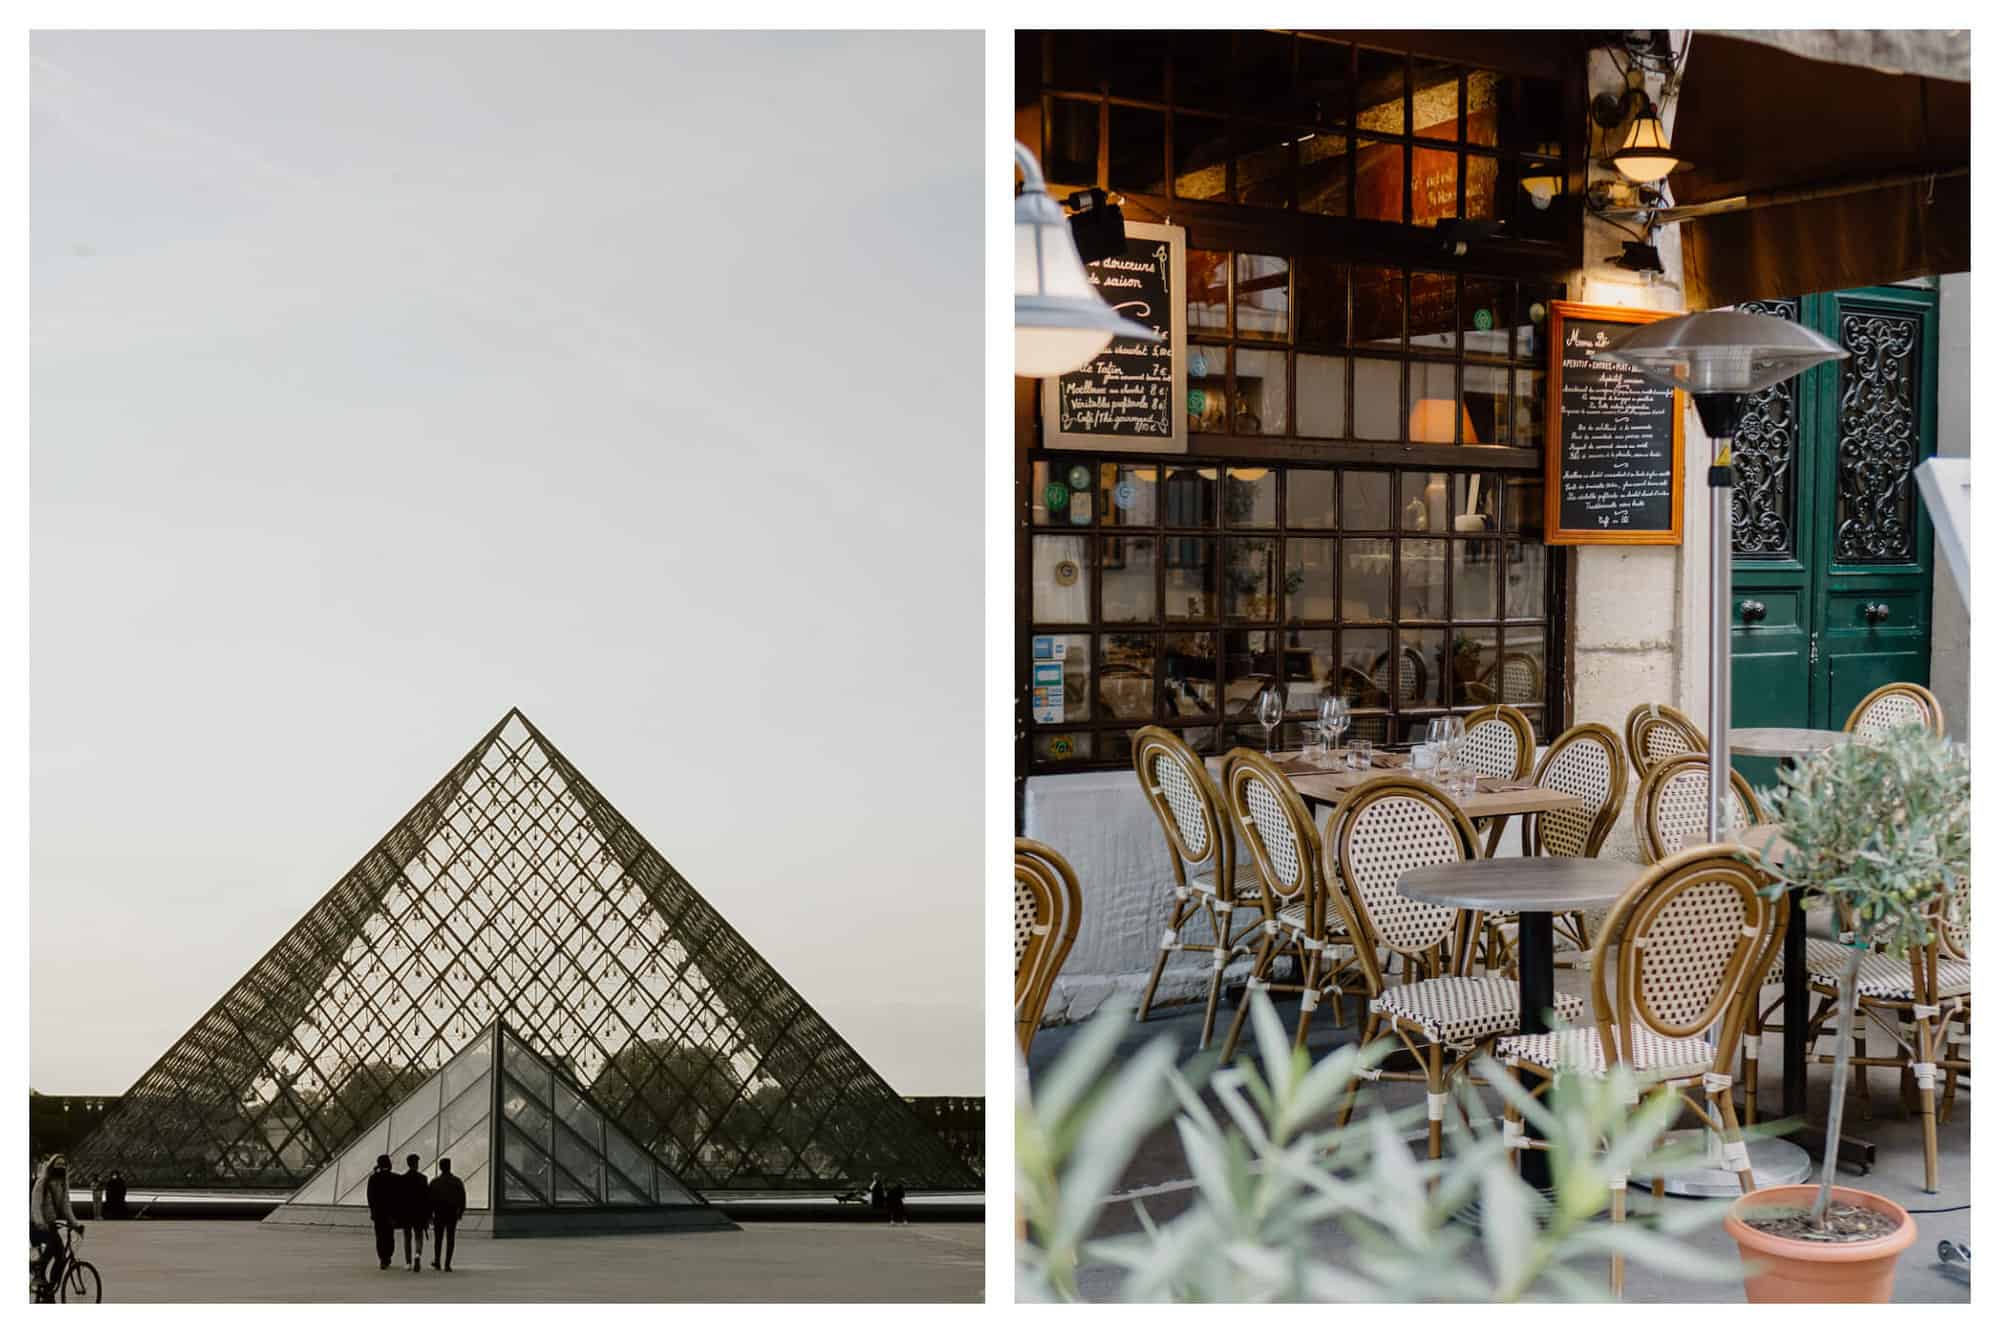 Left: the glass pyramid outside the Louvre Museum. There is a group of three people walking in front of it and to the left there is someone on a bike visible. The sky is cloudy. Right: an outdoor seating area at a café in Paris. There are several tables and chairs but they are all empty. A green door is visible to the right and there is a heater visible. There are a few small potted plants, and a window of the café is visible. 